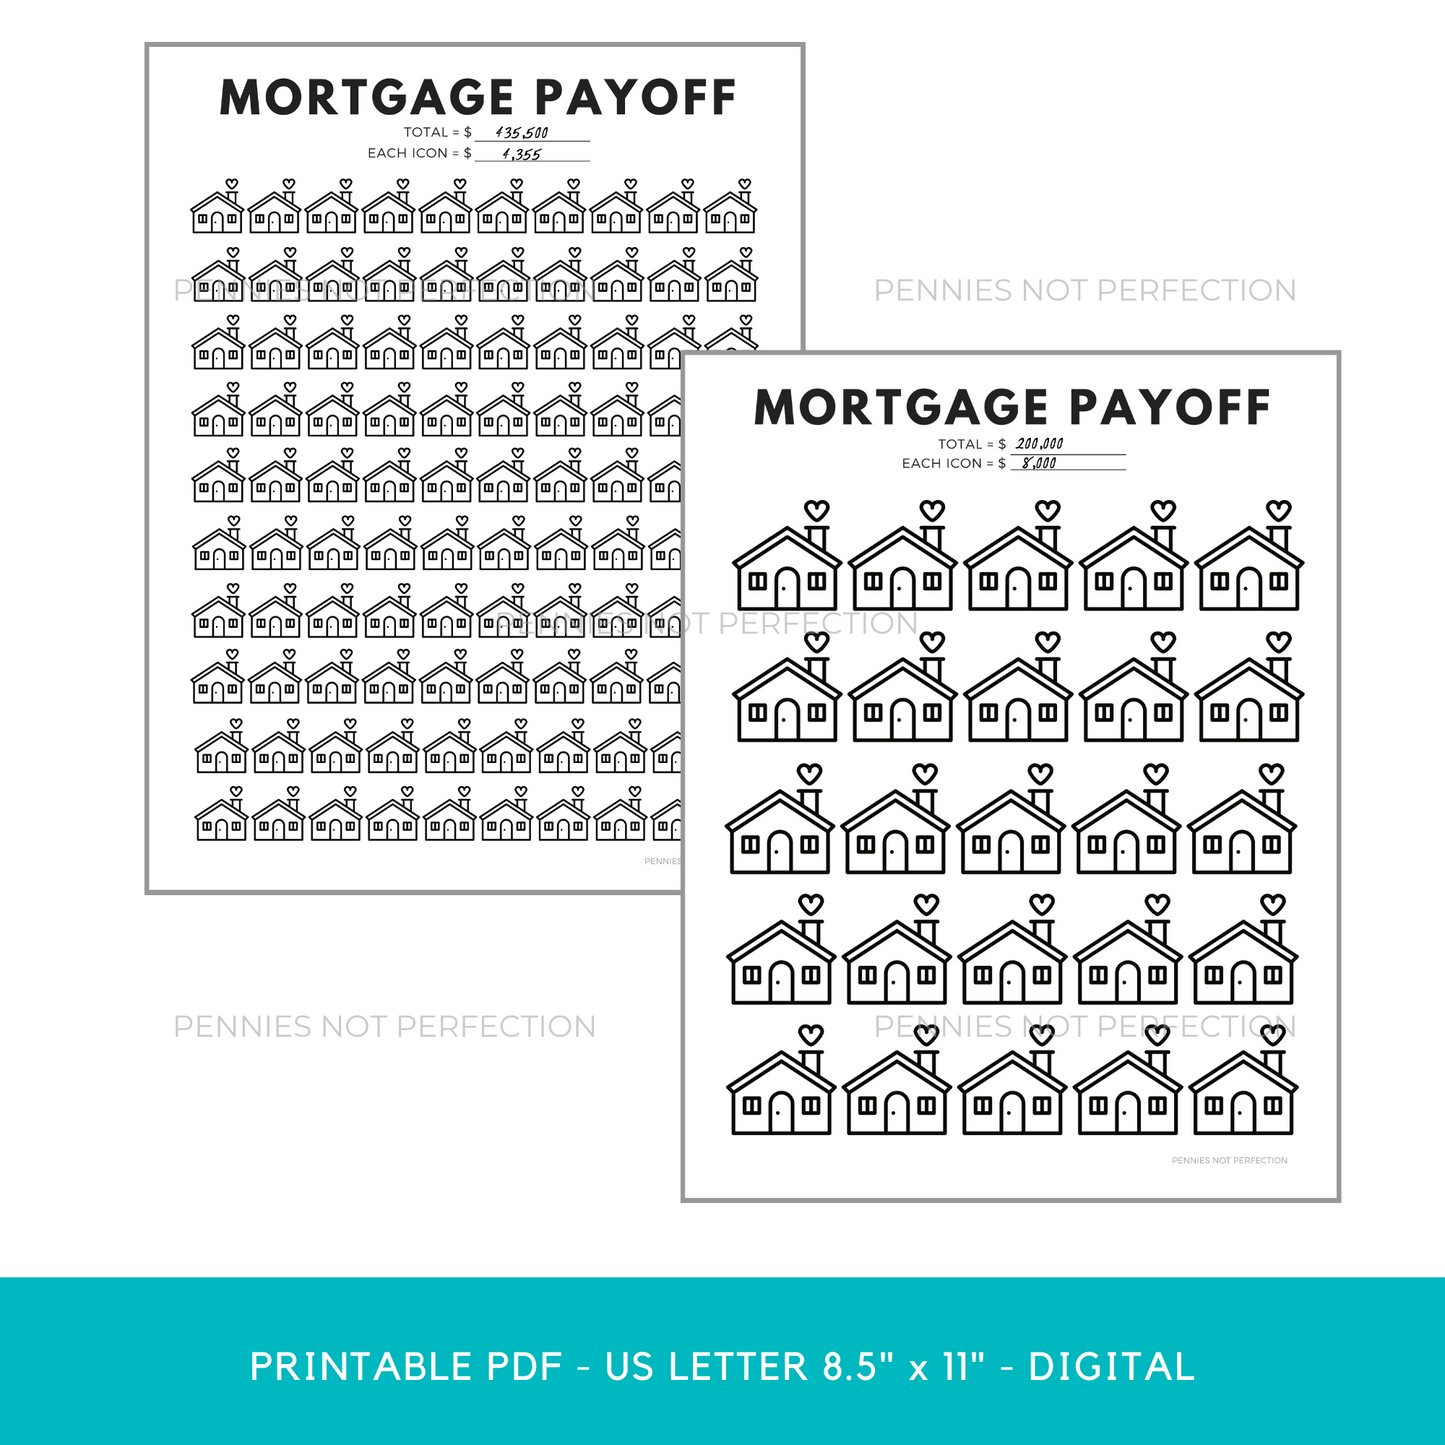 Mortgage Payoff Tracker Printable